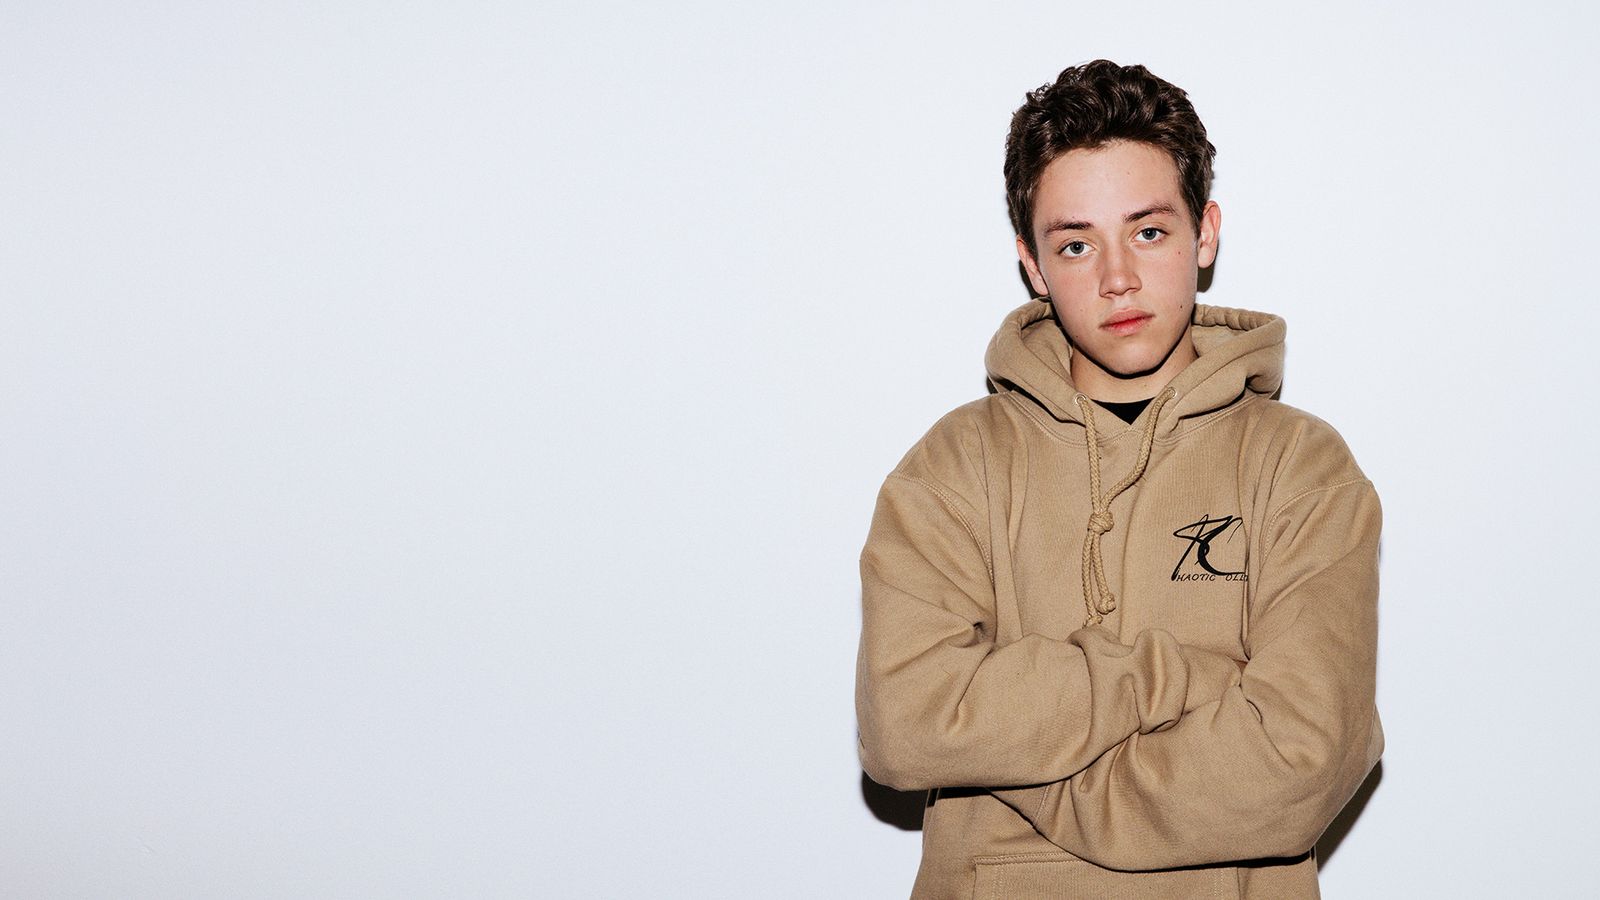 Ethan Cutkowsky Thomas Welch Highsnobiety Khaotic Collective Mike Cherman chinatown market